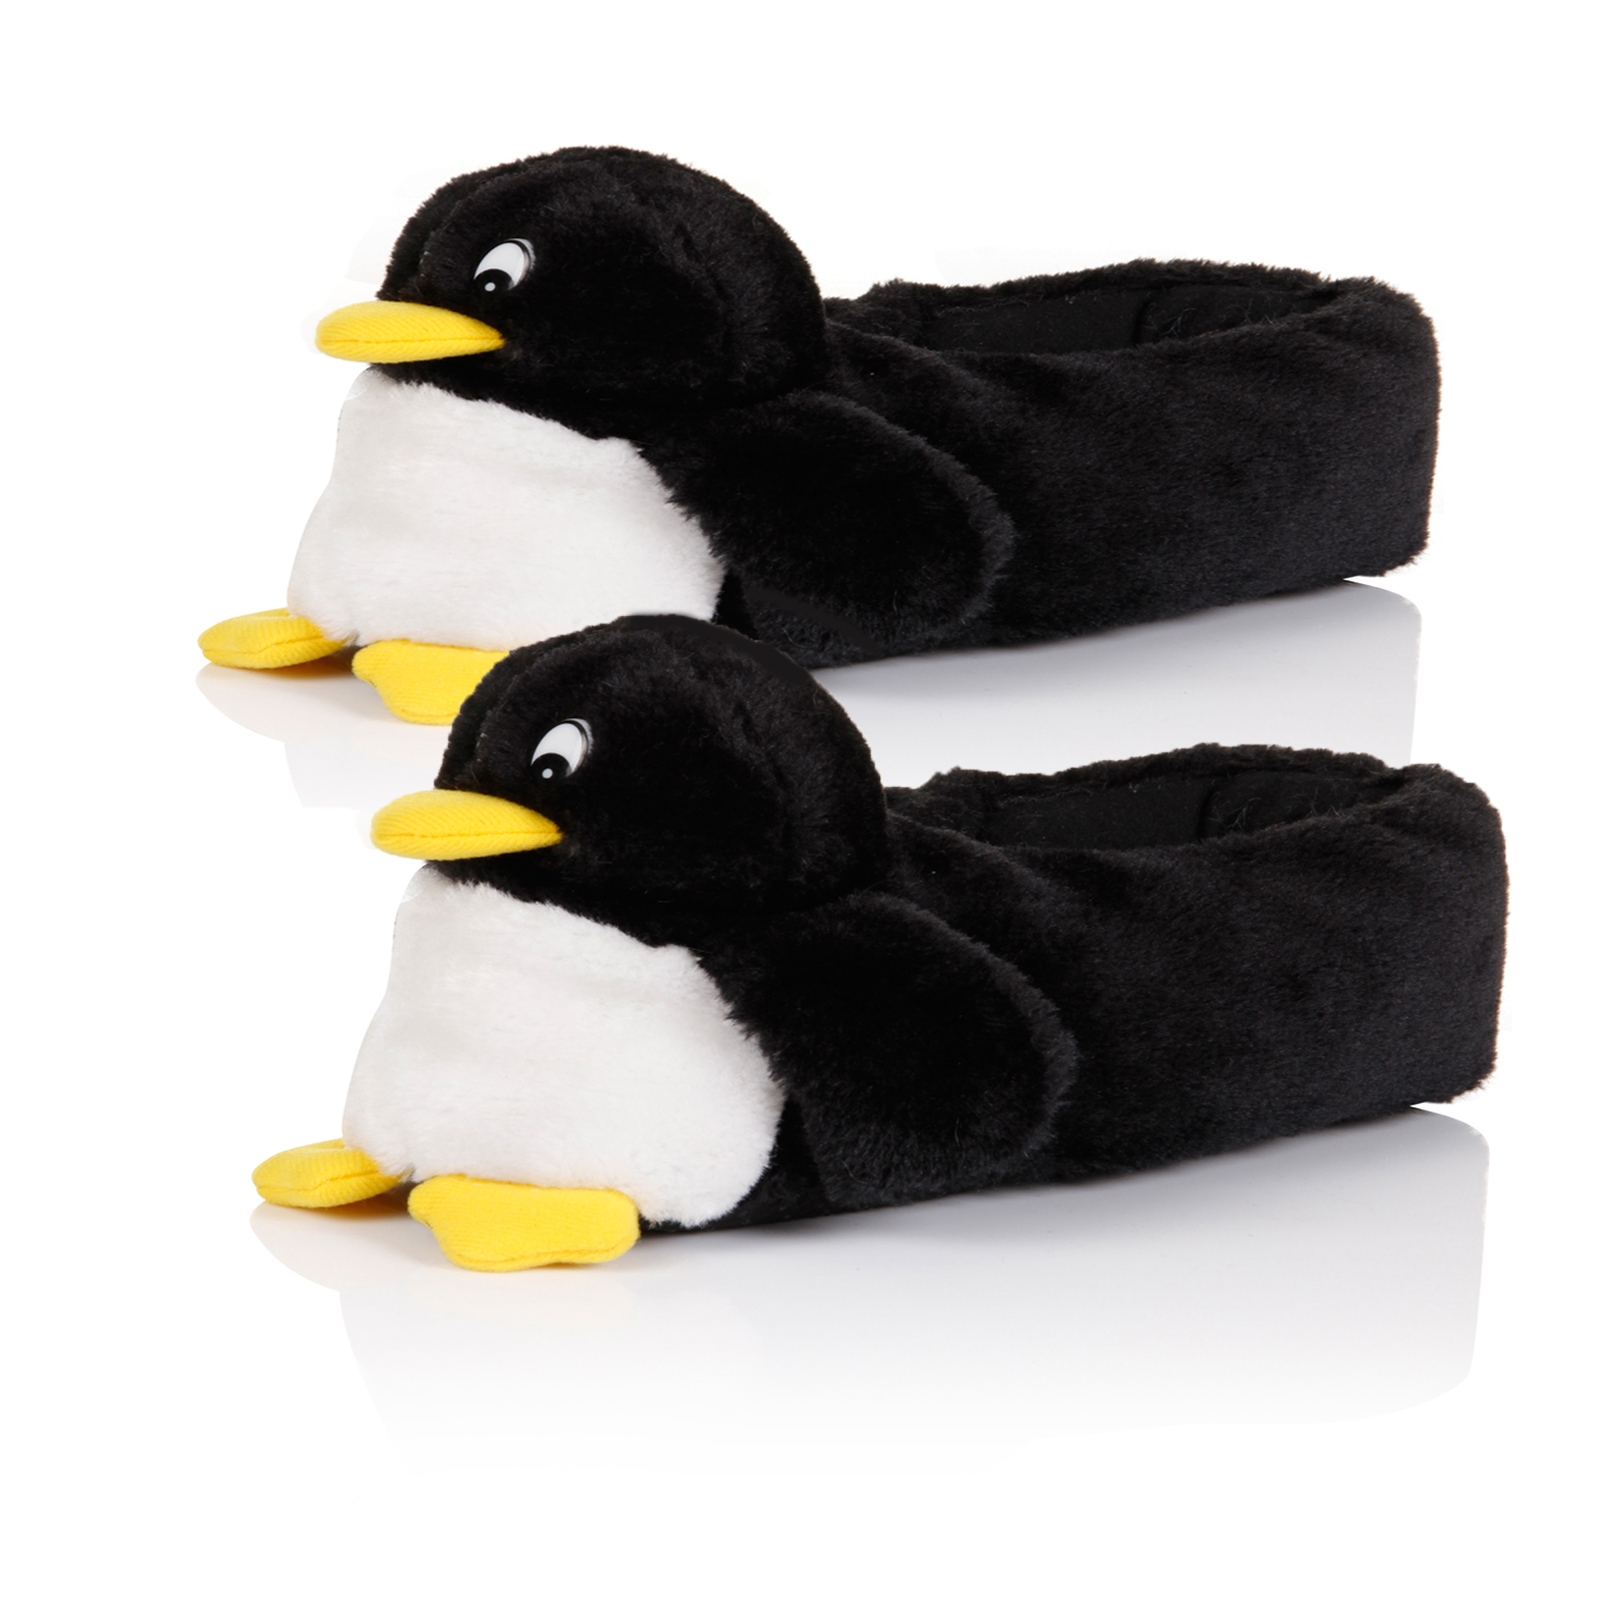 Womens Penguin Slippers Ladies Cute Comfy Fluffy Girls Novelty Animal ...